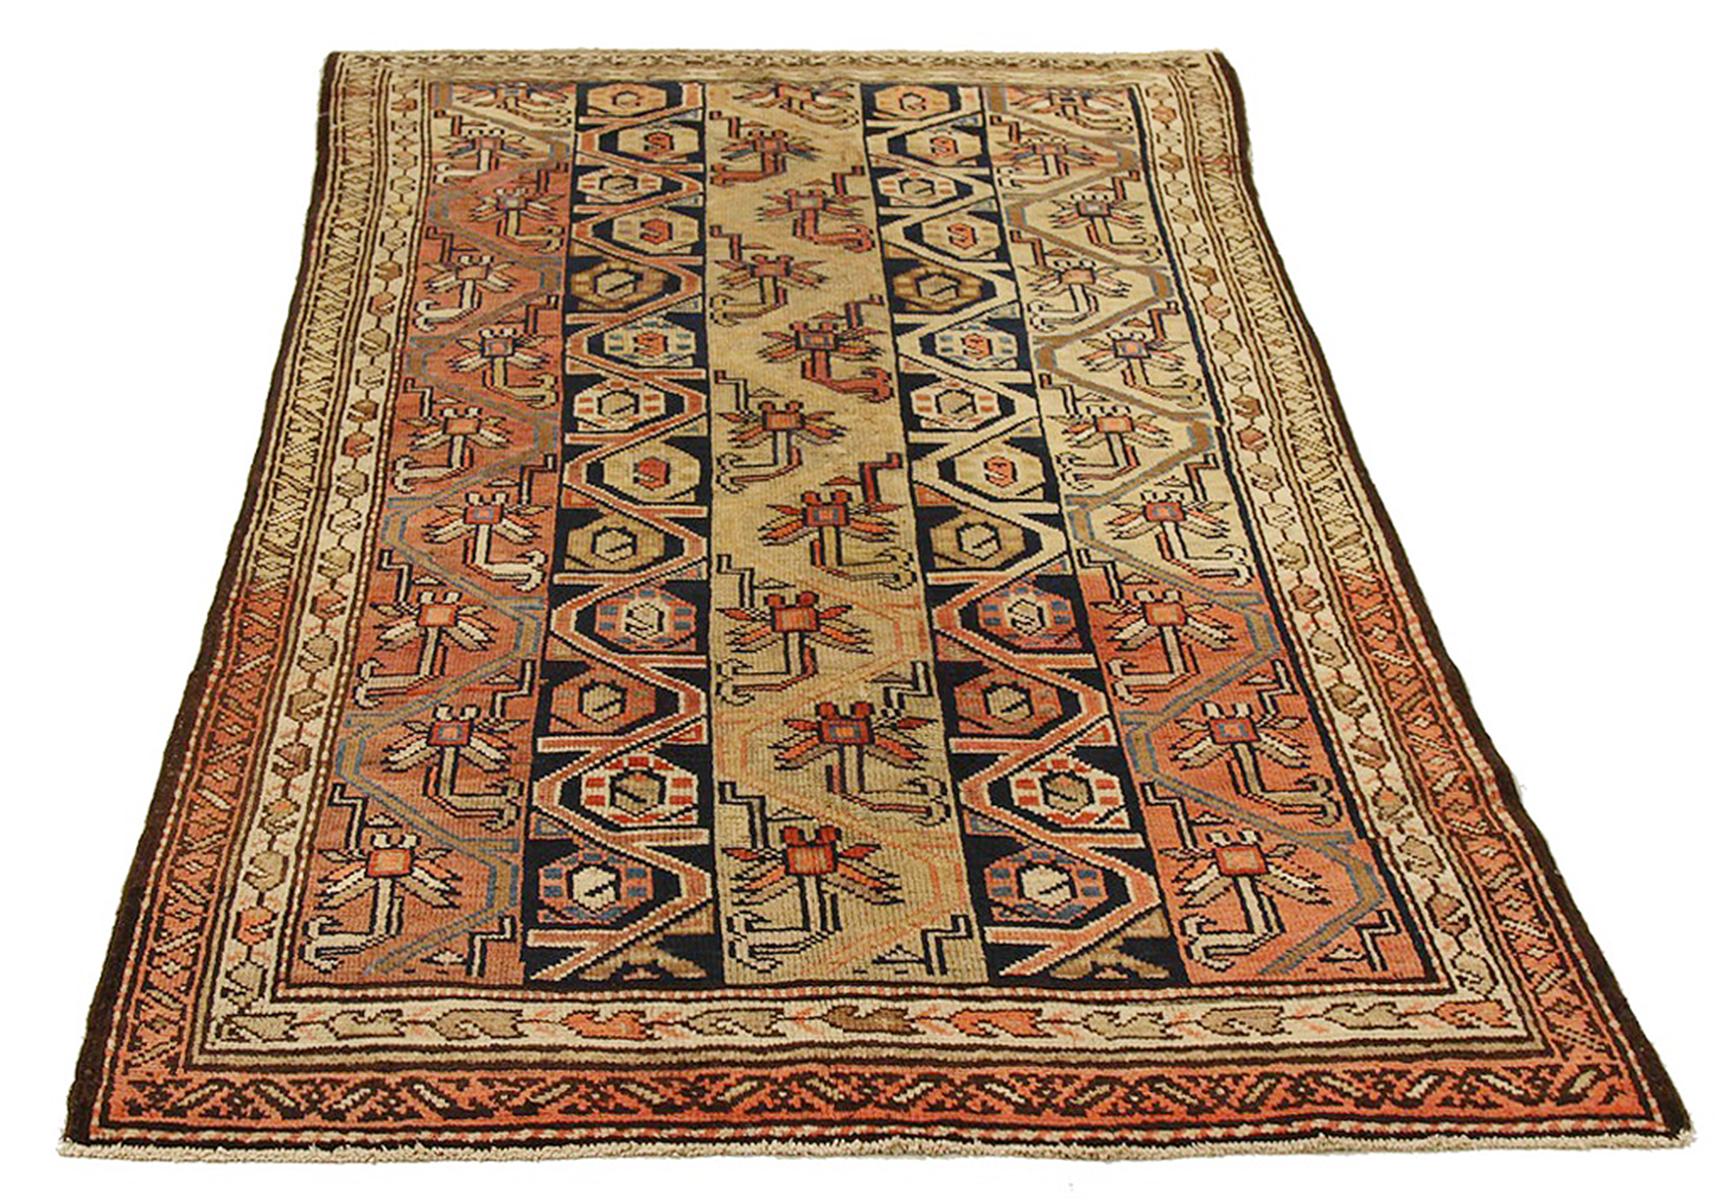 Antique Persian rug handwoven from the finest sheep’s wool and colored with all-natural vegetable dyes that are safe for humans and pets. It’s a traditional Hamedan design featuring floral patterns in bold colors of black and red over a beige and